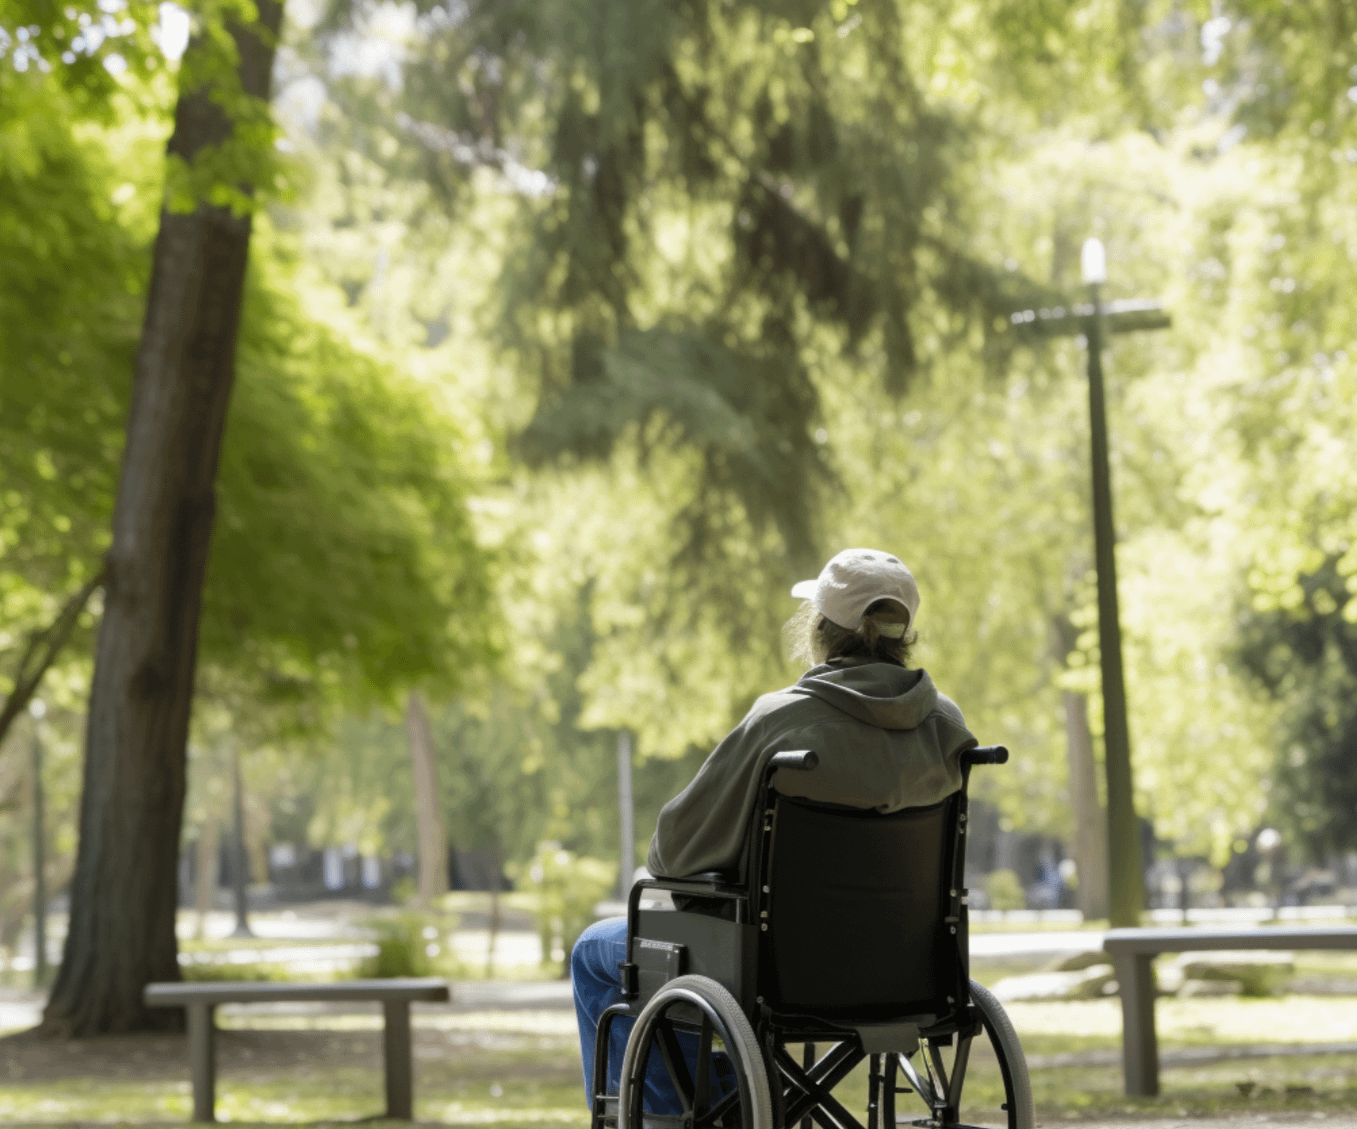 A person in a wheelchair at a park